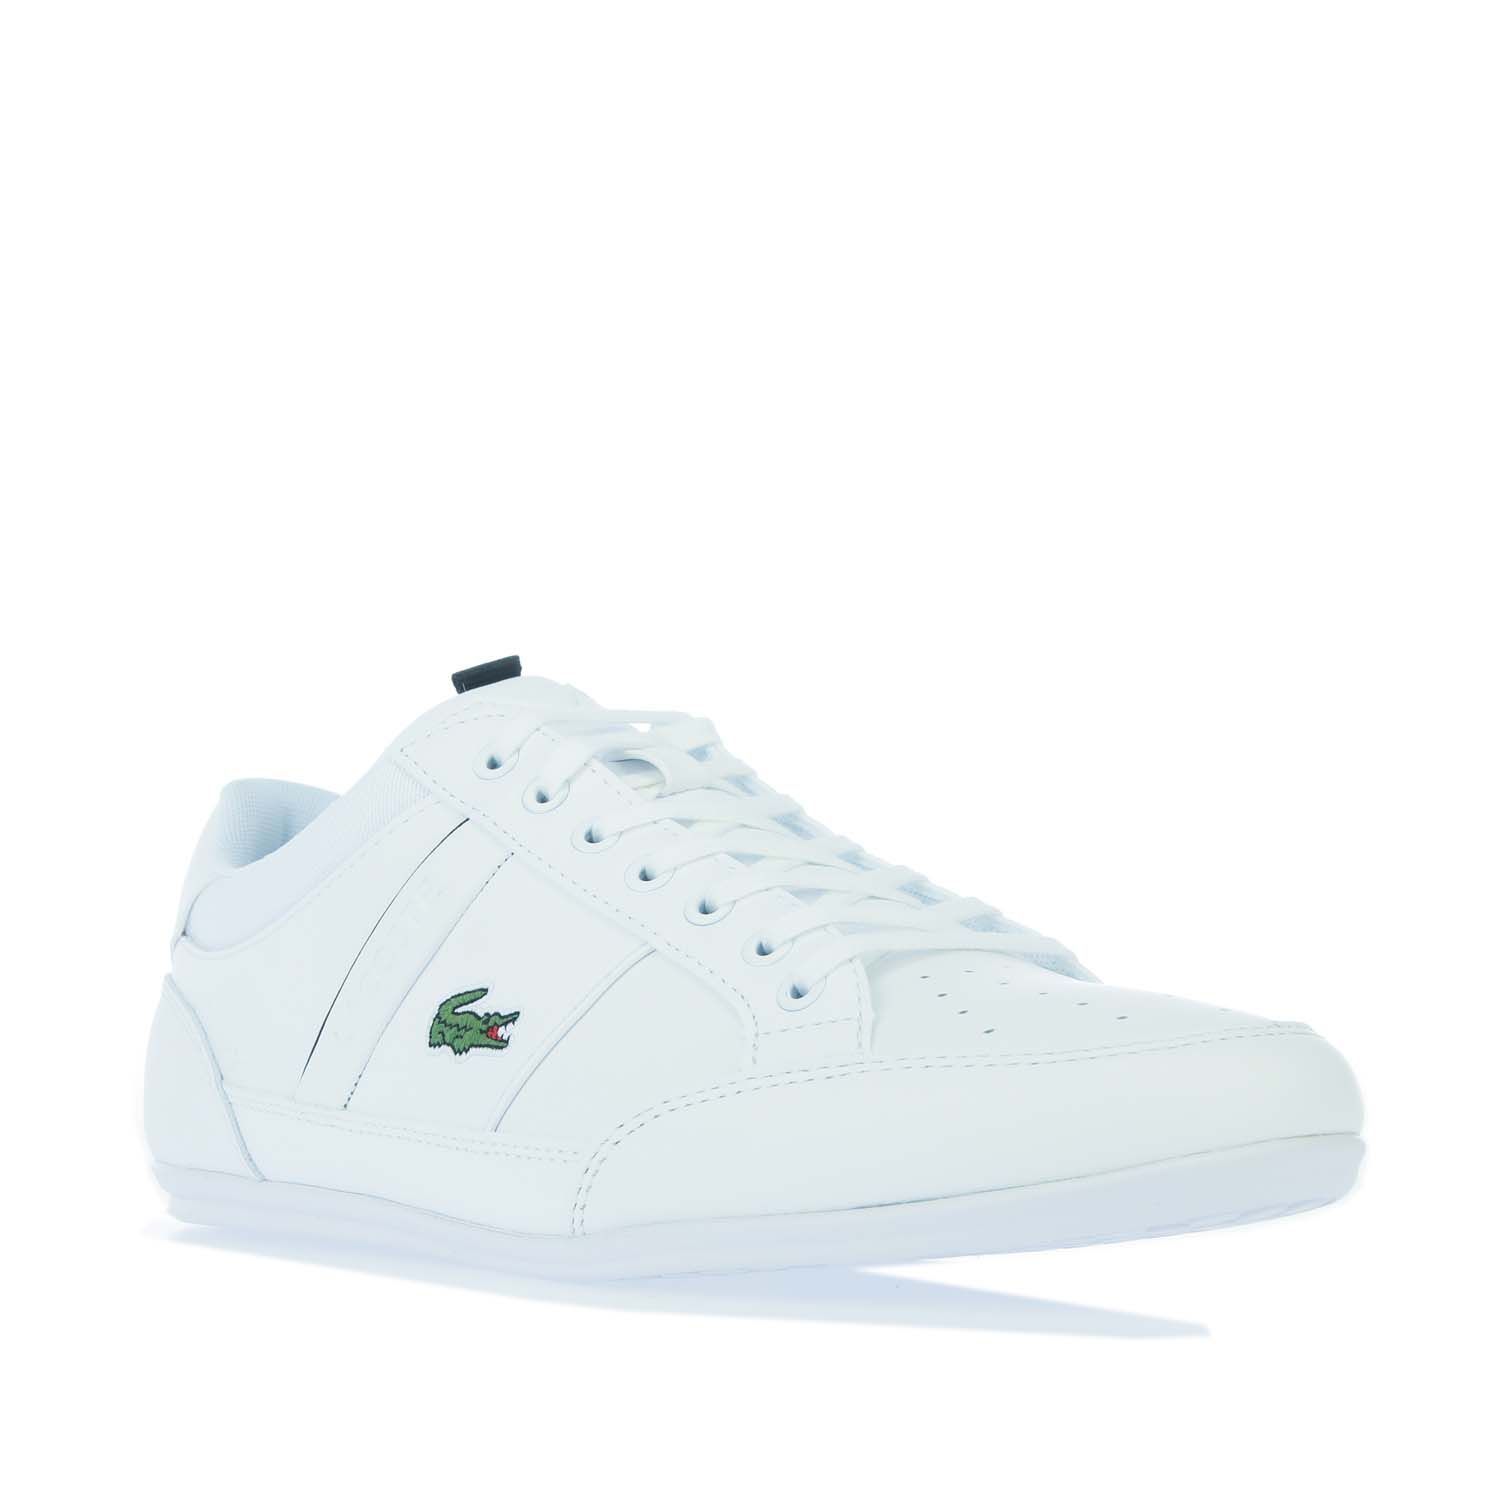 Mens Lacoste Chaymon Trainers in white black.- Synthetic and leather uppers. - Lace up closure.- Embroidered green crocodile on the quarter. - Pared-back design in tonal shades for maximum versatility.- Rubber outsole.- Leather upper  Textile linings.- Ref: 742CMA0014147